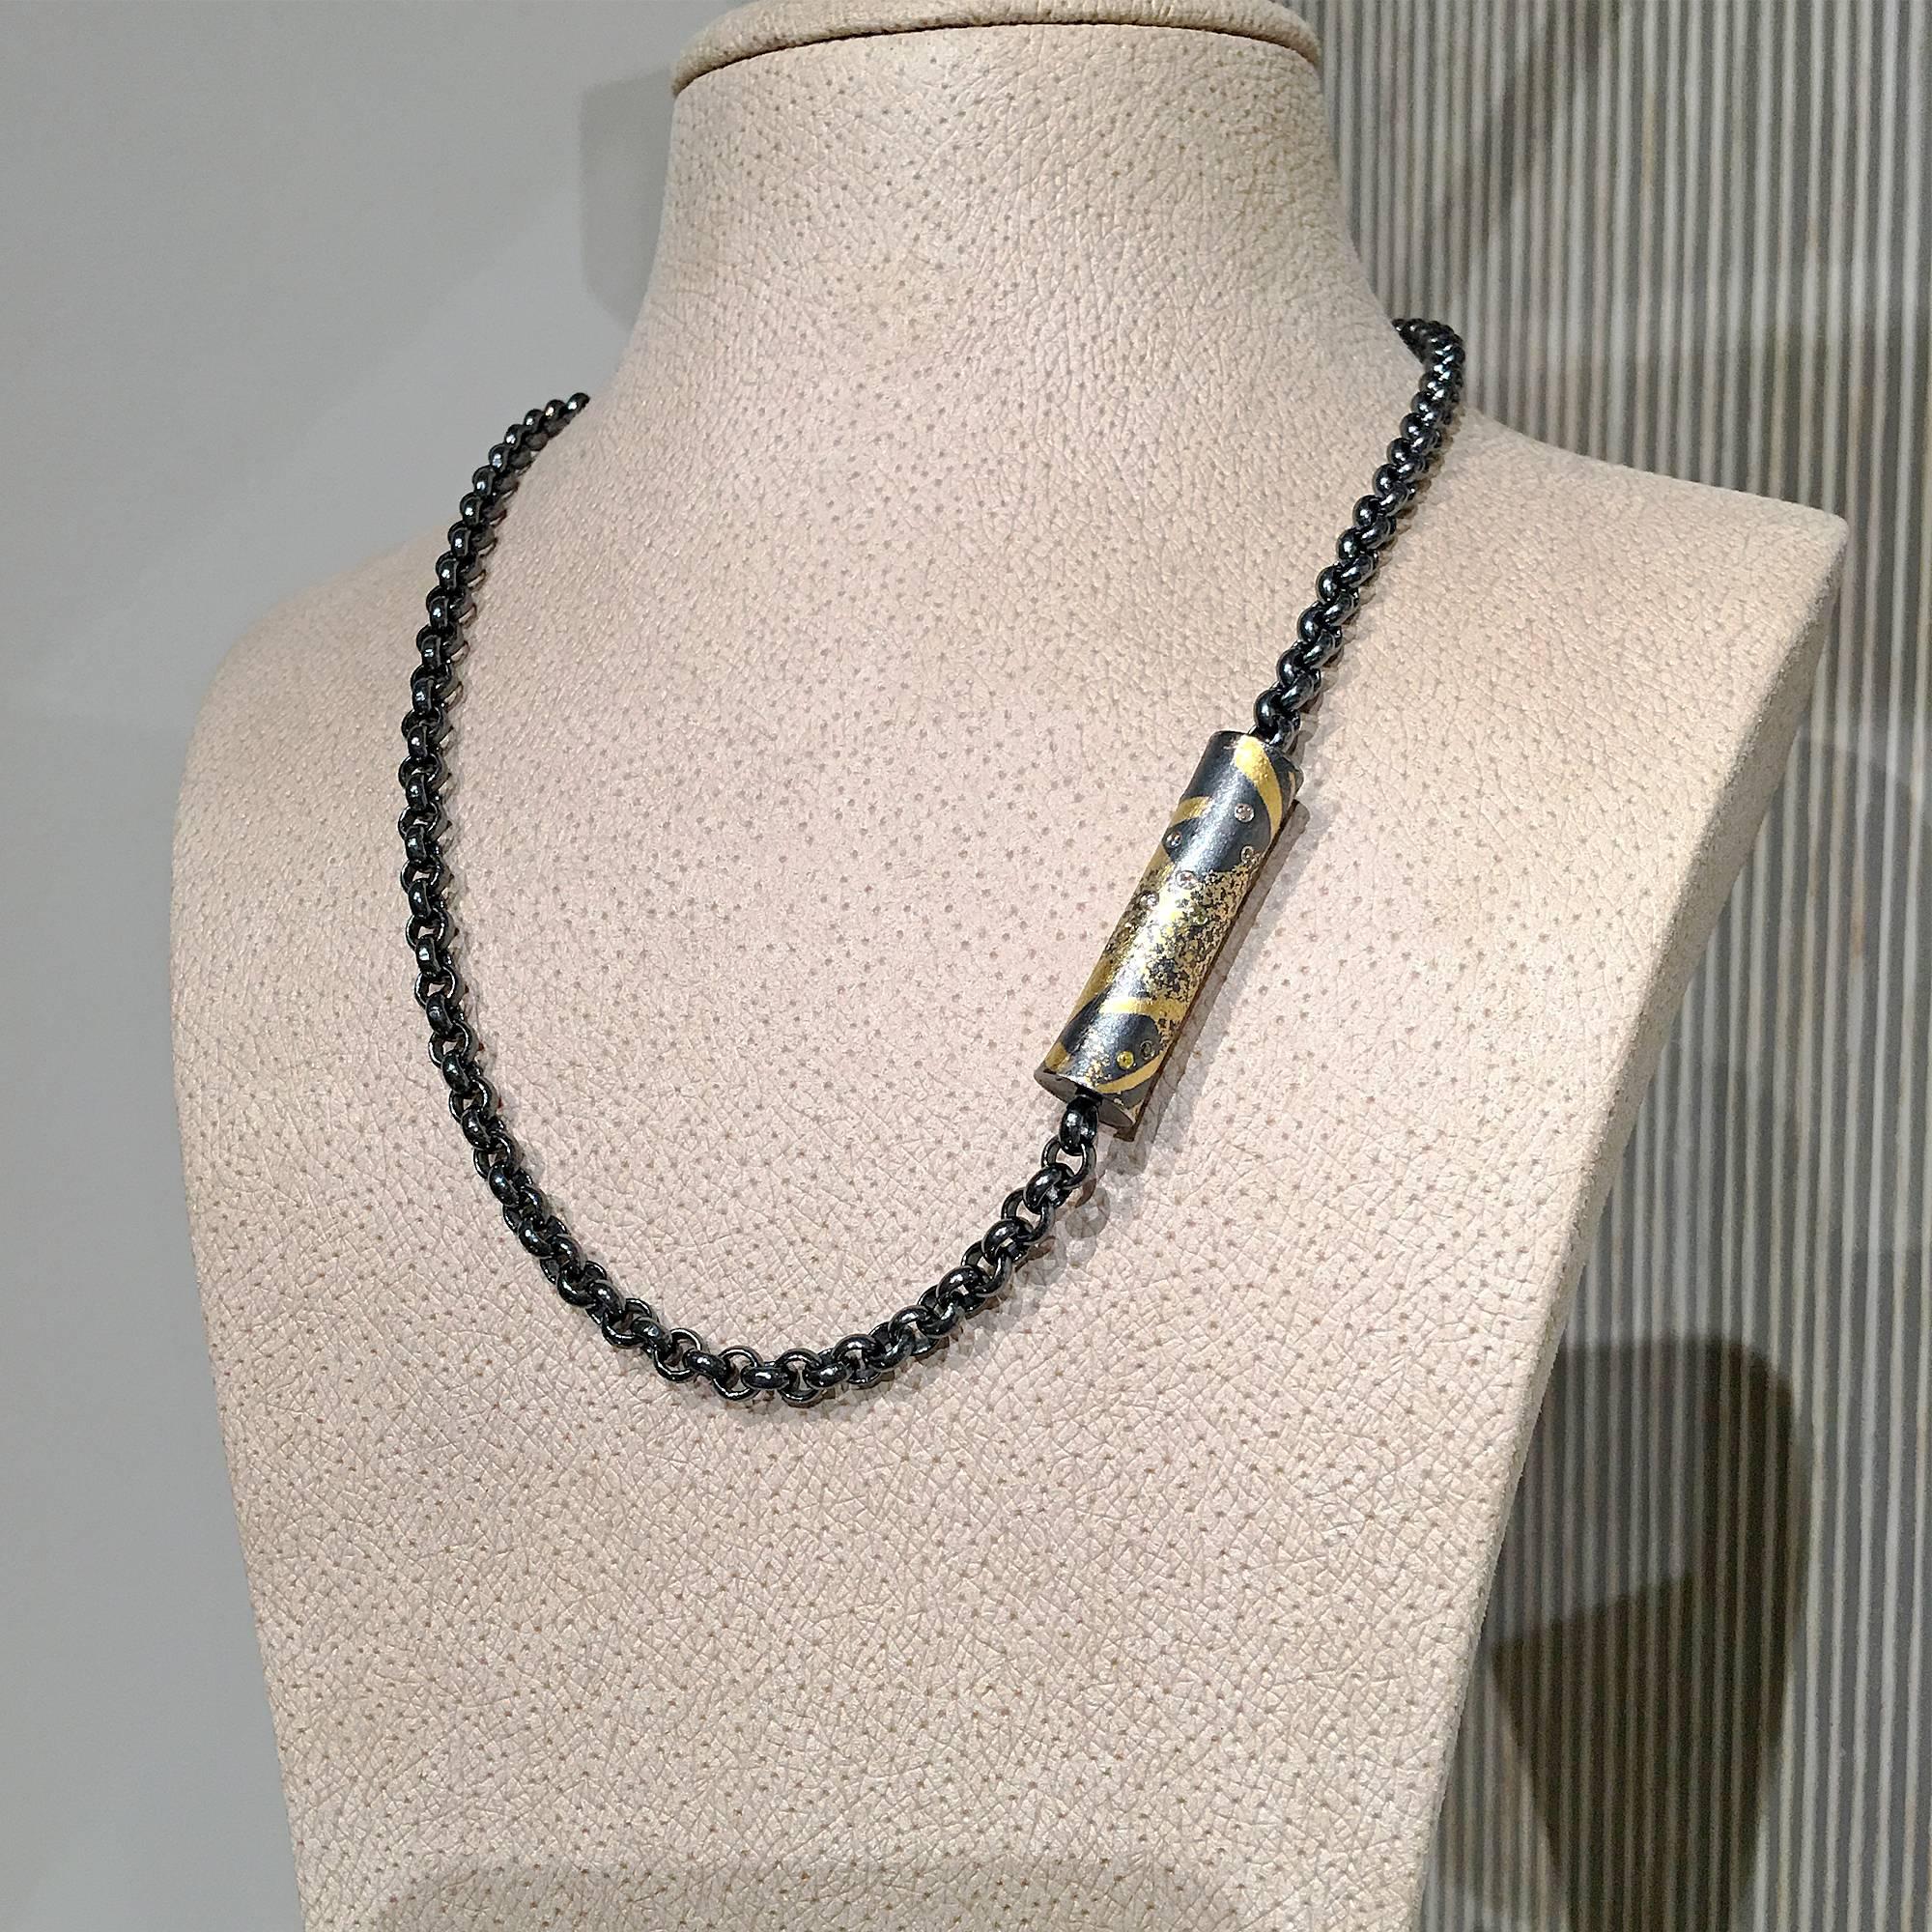 Barrel Necklace handcrafted by renowned jewelry artist Atelier Zobel (Peter Schmid) featuring a 24k gold and oxidized sterling silver concave cylindrical clasp embedded with 0.21 total carats of natural fancy color diamonds and attached on both ends